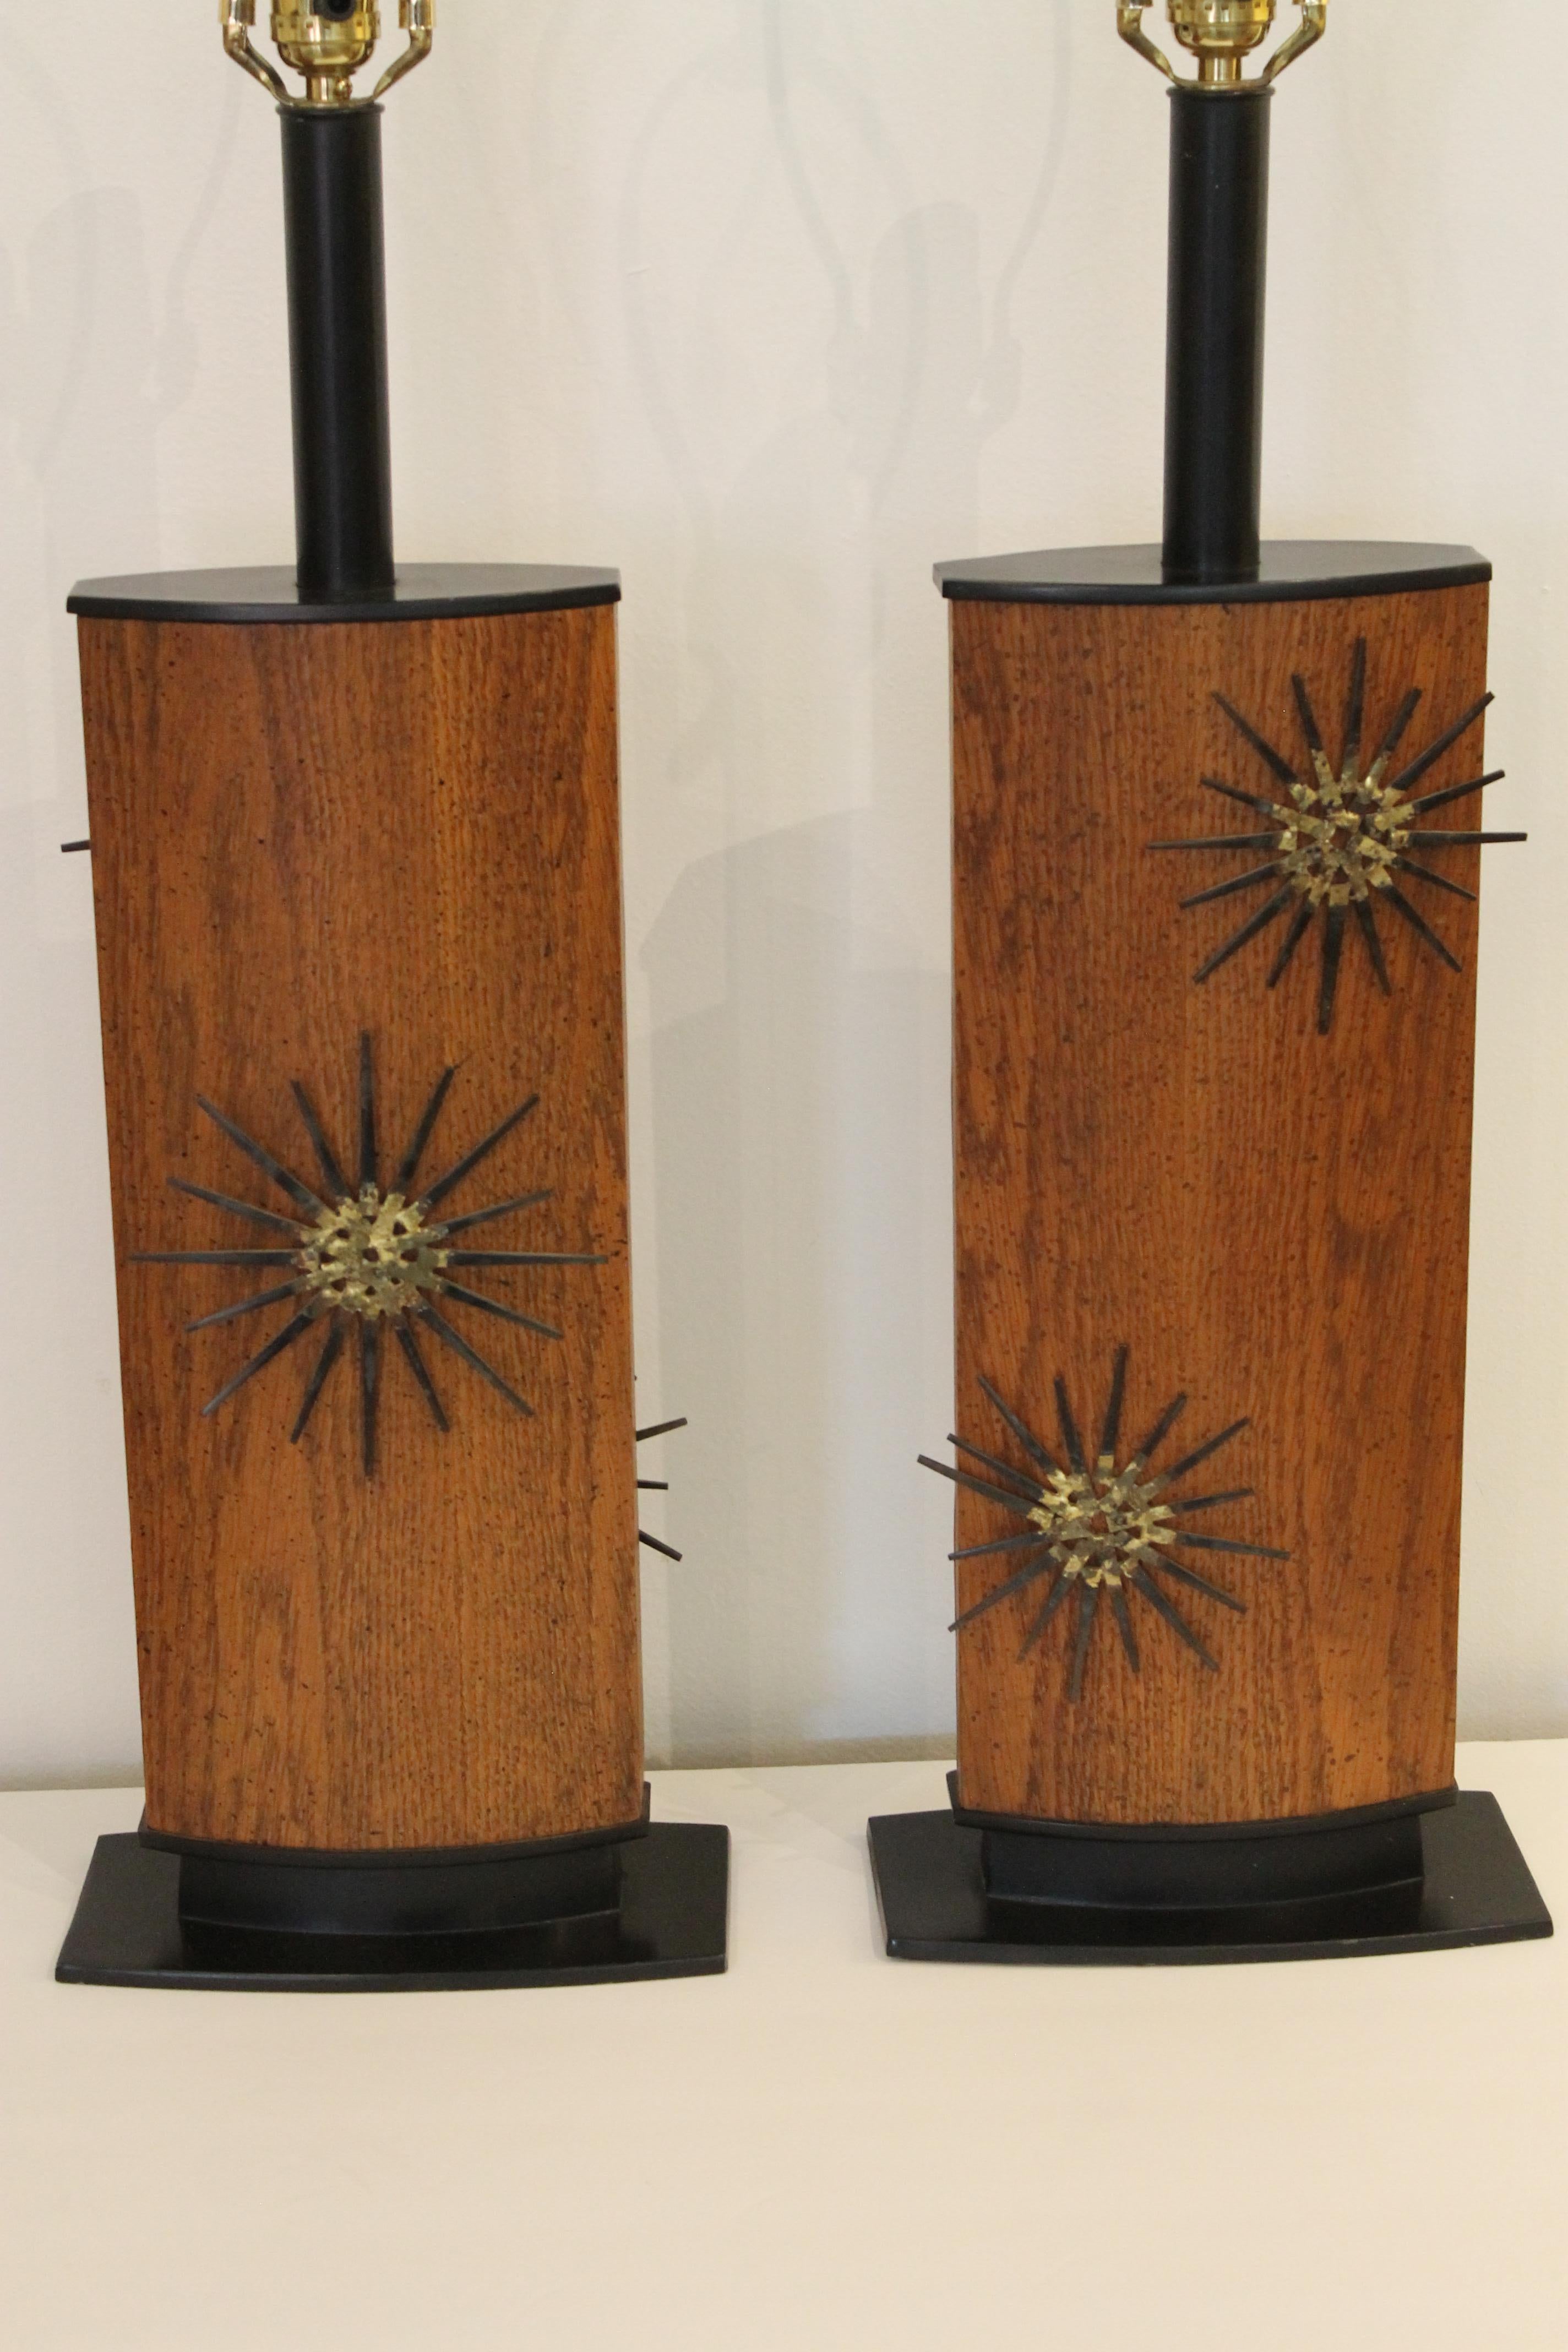 A matched pair of painted steel and wood table lamps with nail art sunburst elements front and back. Interesting feature here is that the lamps are reversible. The central wood portion rotates on the base so that you have the option to show the side